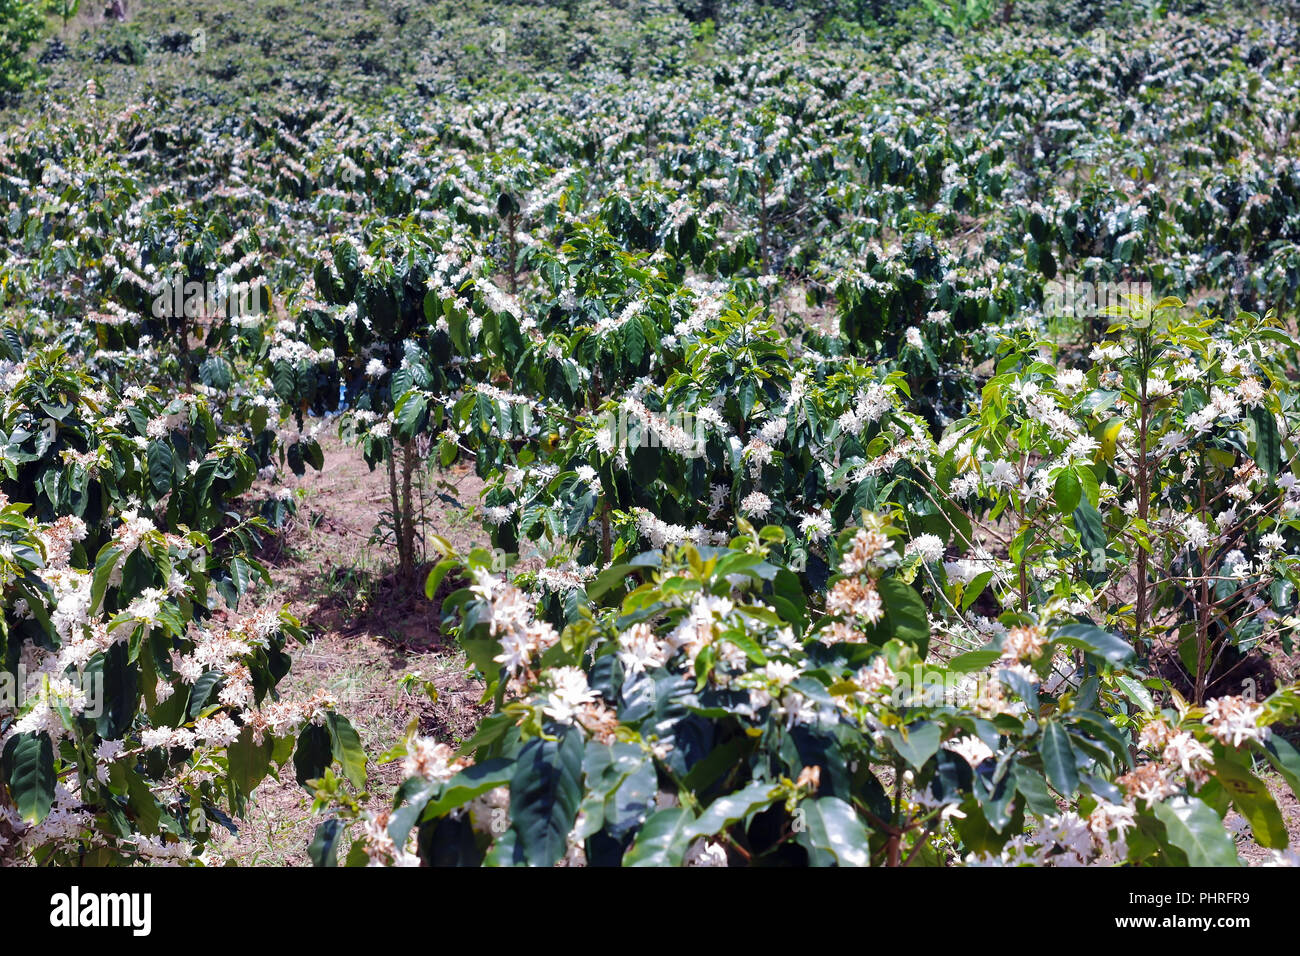 coffee trees are blooming, coffee farms, agricultural development and production Stock Photo